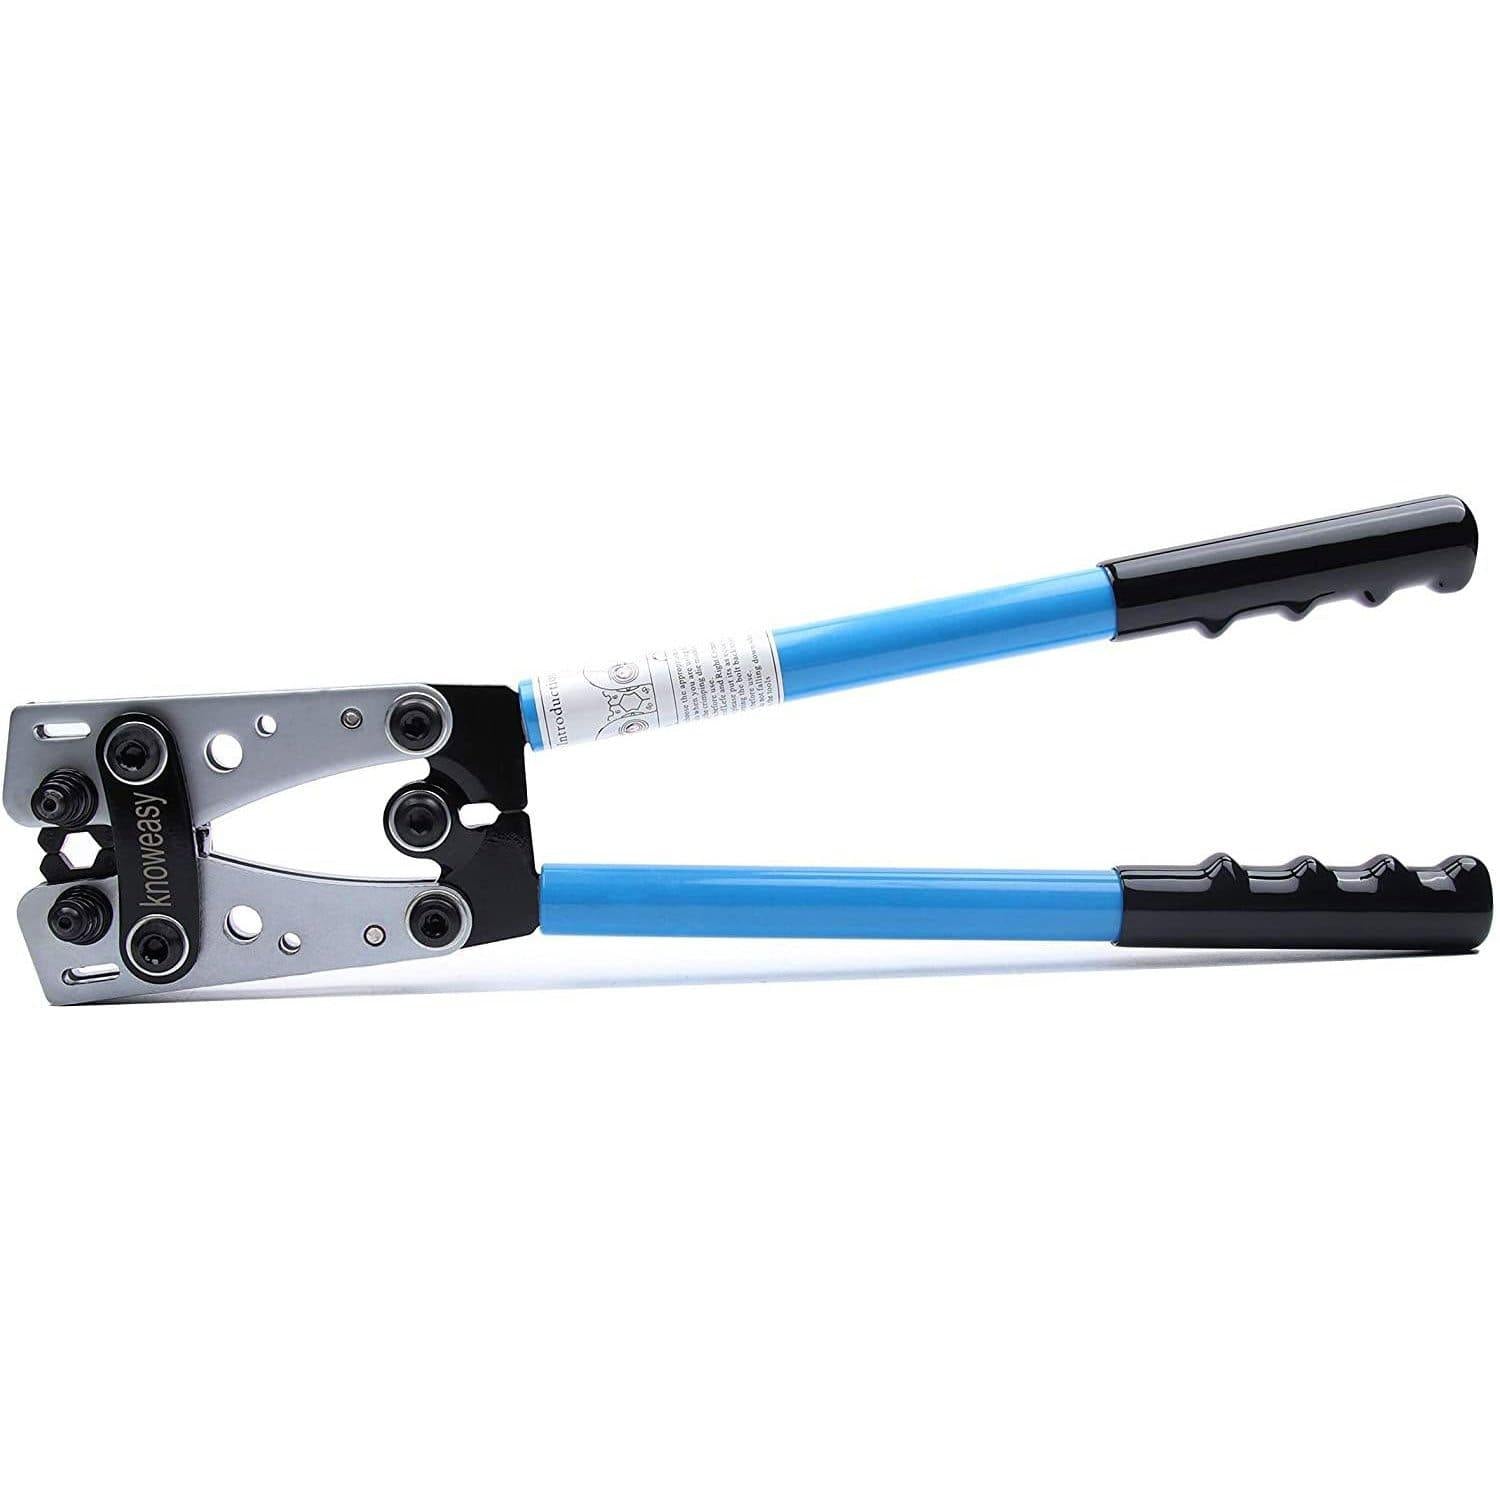 Cable Cutter,Knoweasy Heavy Duty Aluminum Copper Ratchet Cable Cutter,Cut  up to 240mm² Wire Cutter